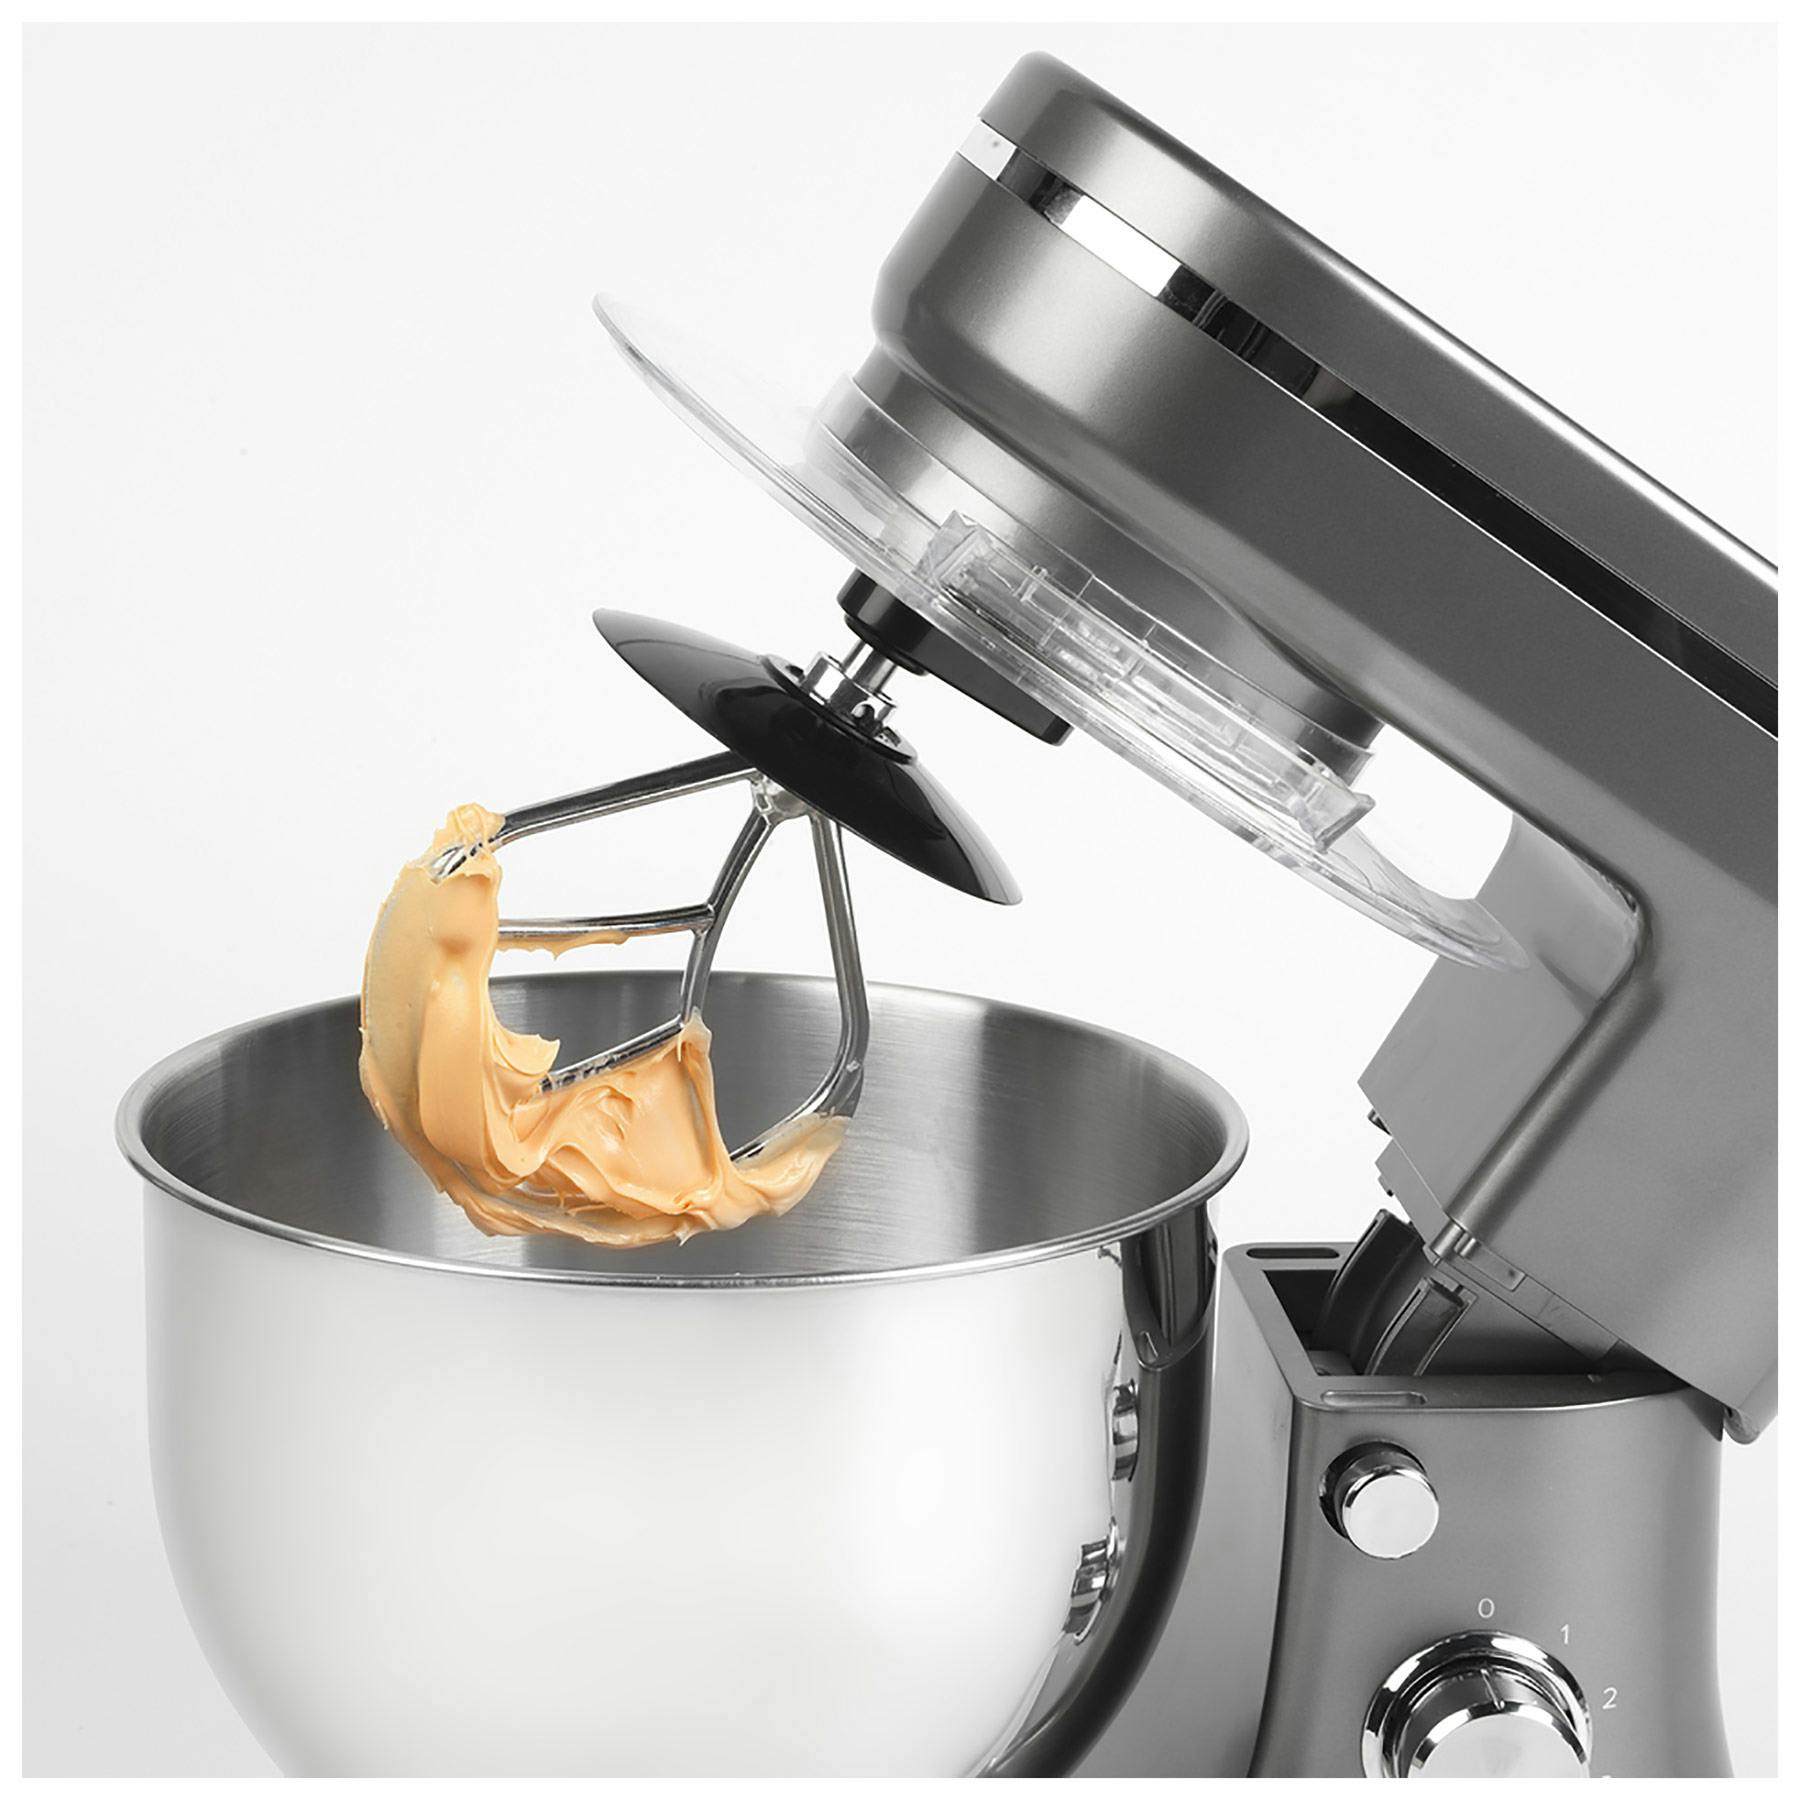 Shop Salter Stand Mixers & Electric Whisks